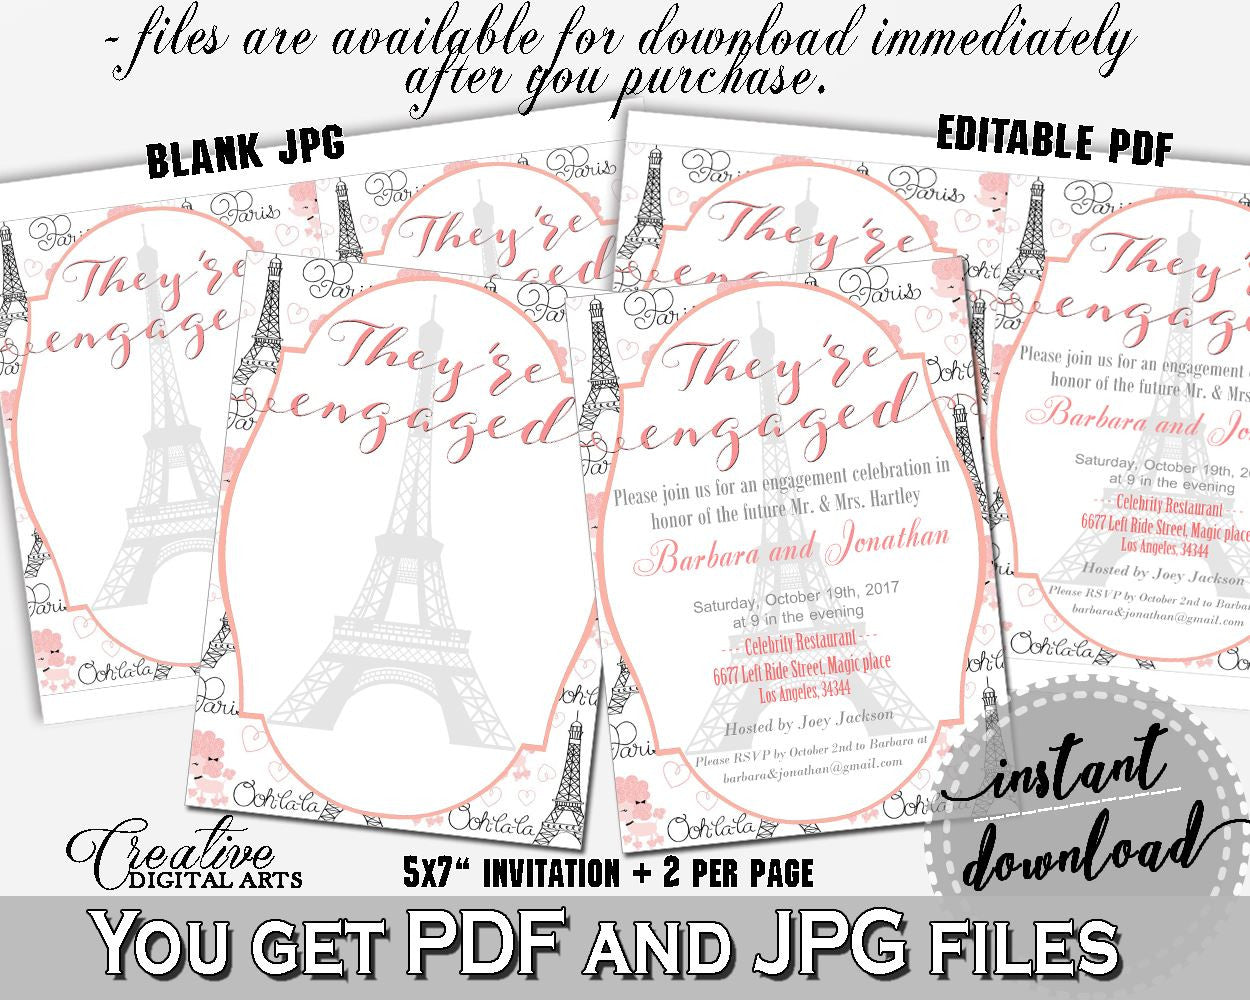 Paris Bridal Shower Engaged Invitation Editable in Pink And Gray, they're engaged, grey eiffel tower, party planning, party stuff - NJAL9 - Digital Product